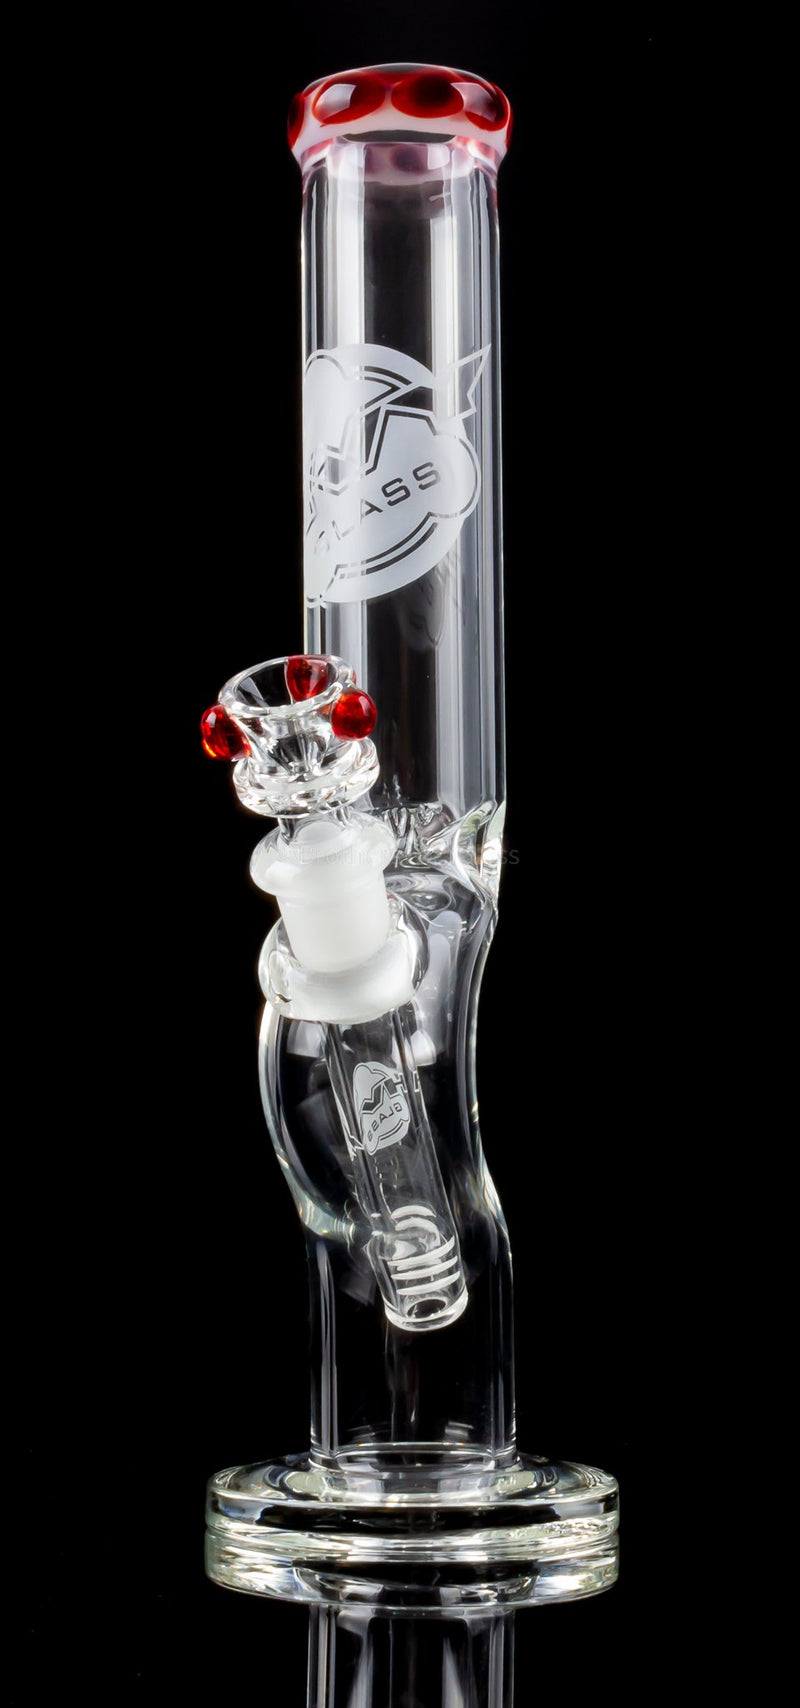 HVY Glass Heady Worked Color Dot Curve Bong - Color Variations.